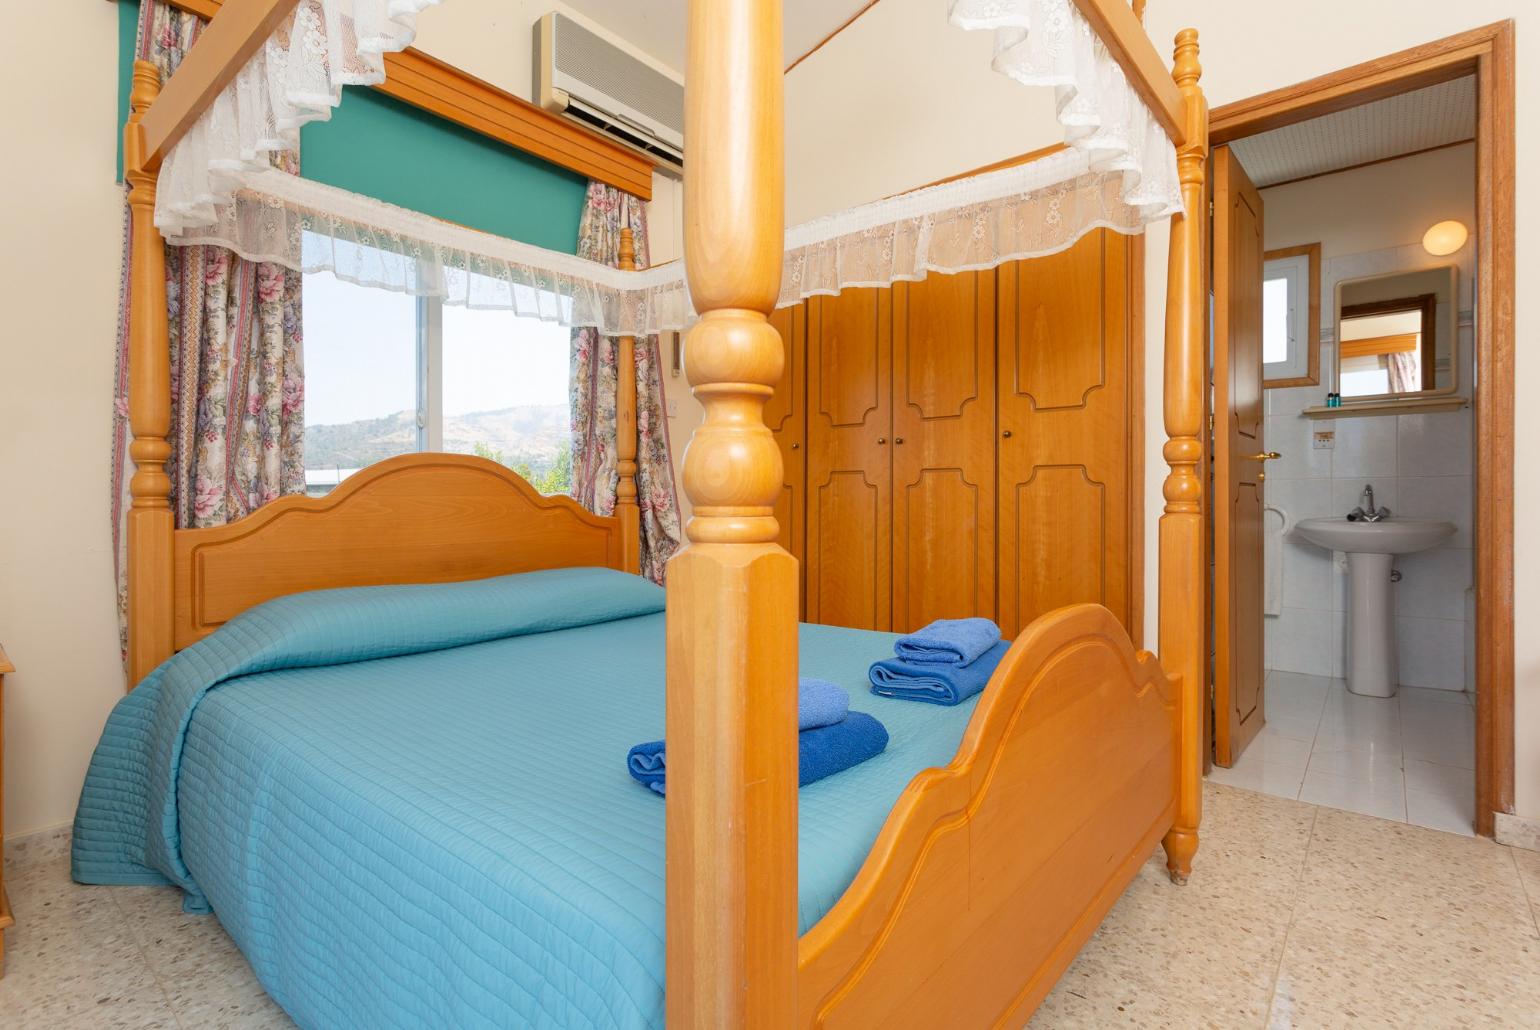 Double bedroom with A/C, en suite bathroom, and balcony access with sea views